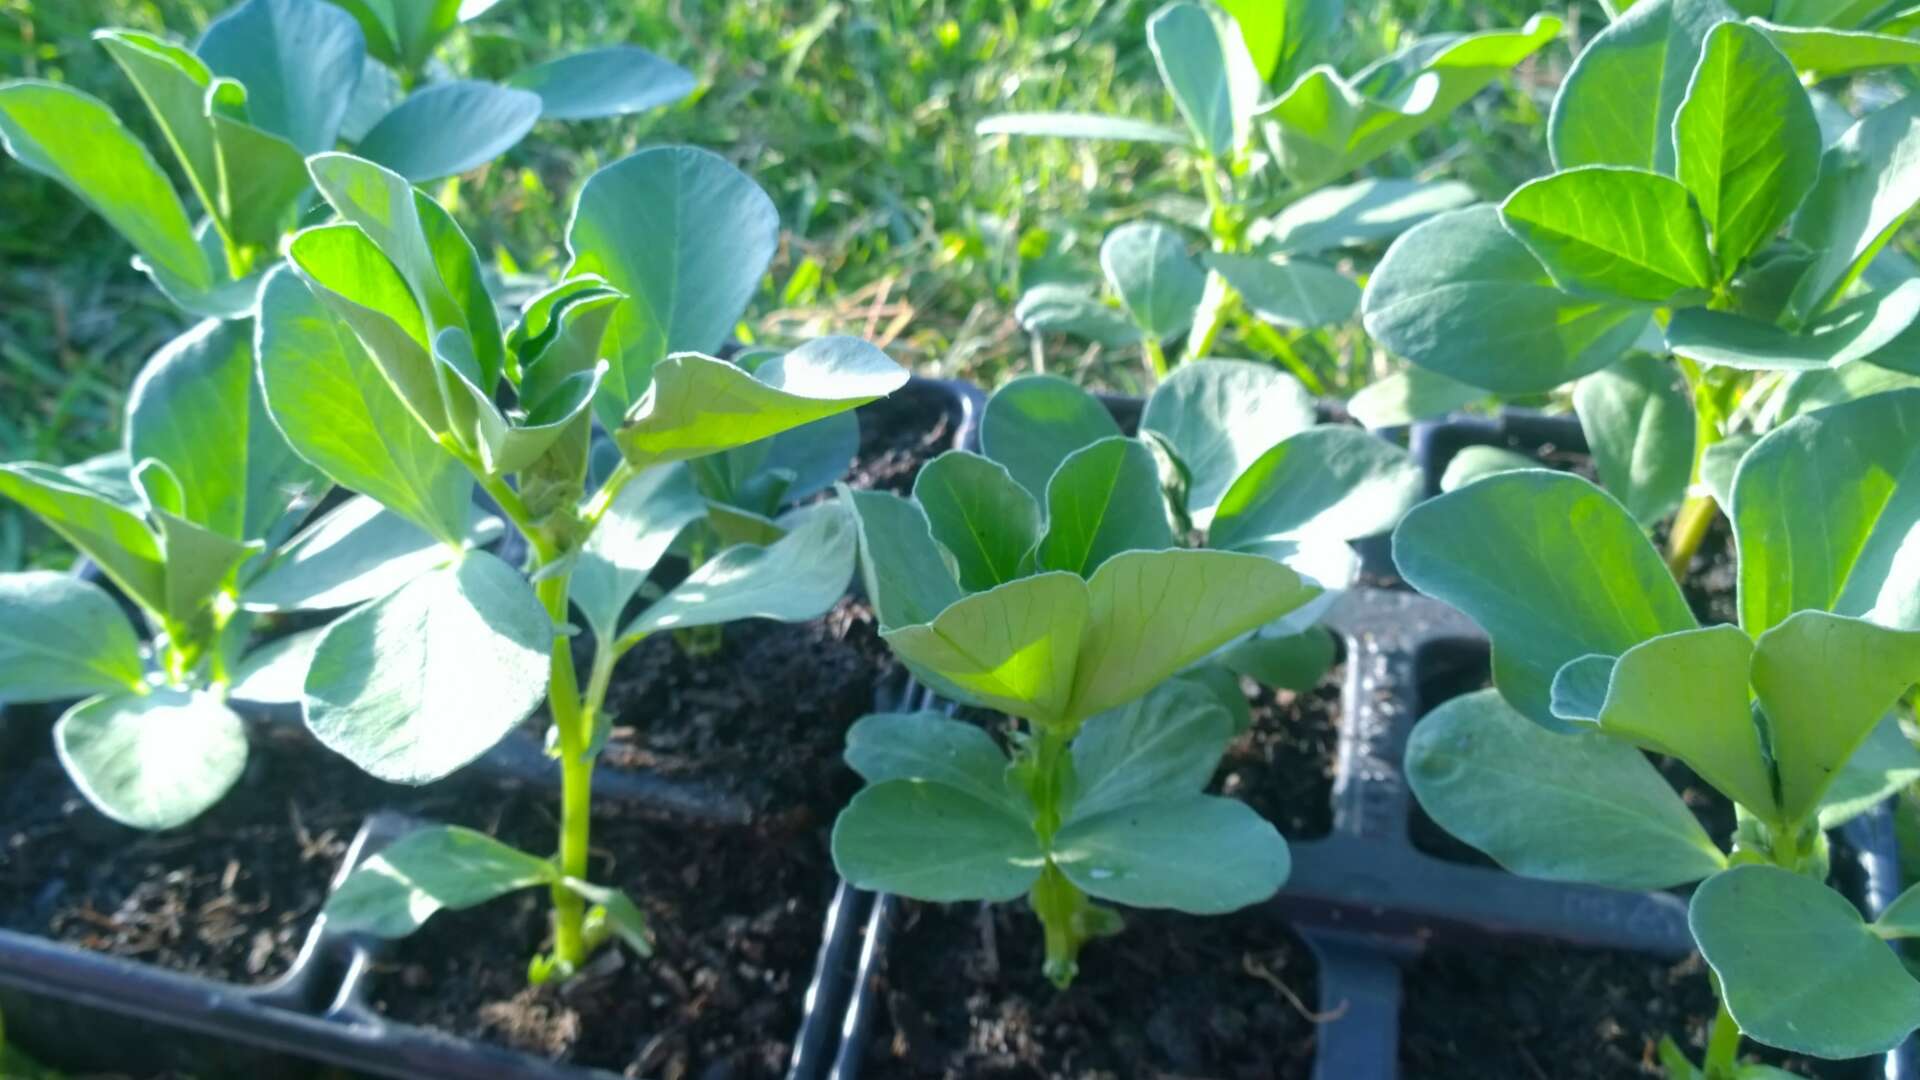 Broad beans growing in modules